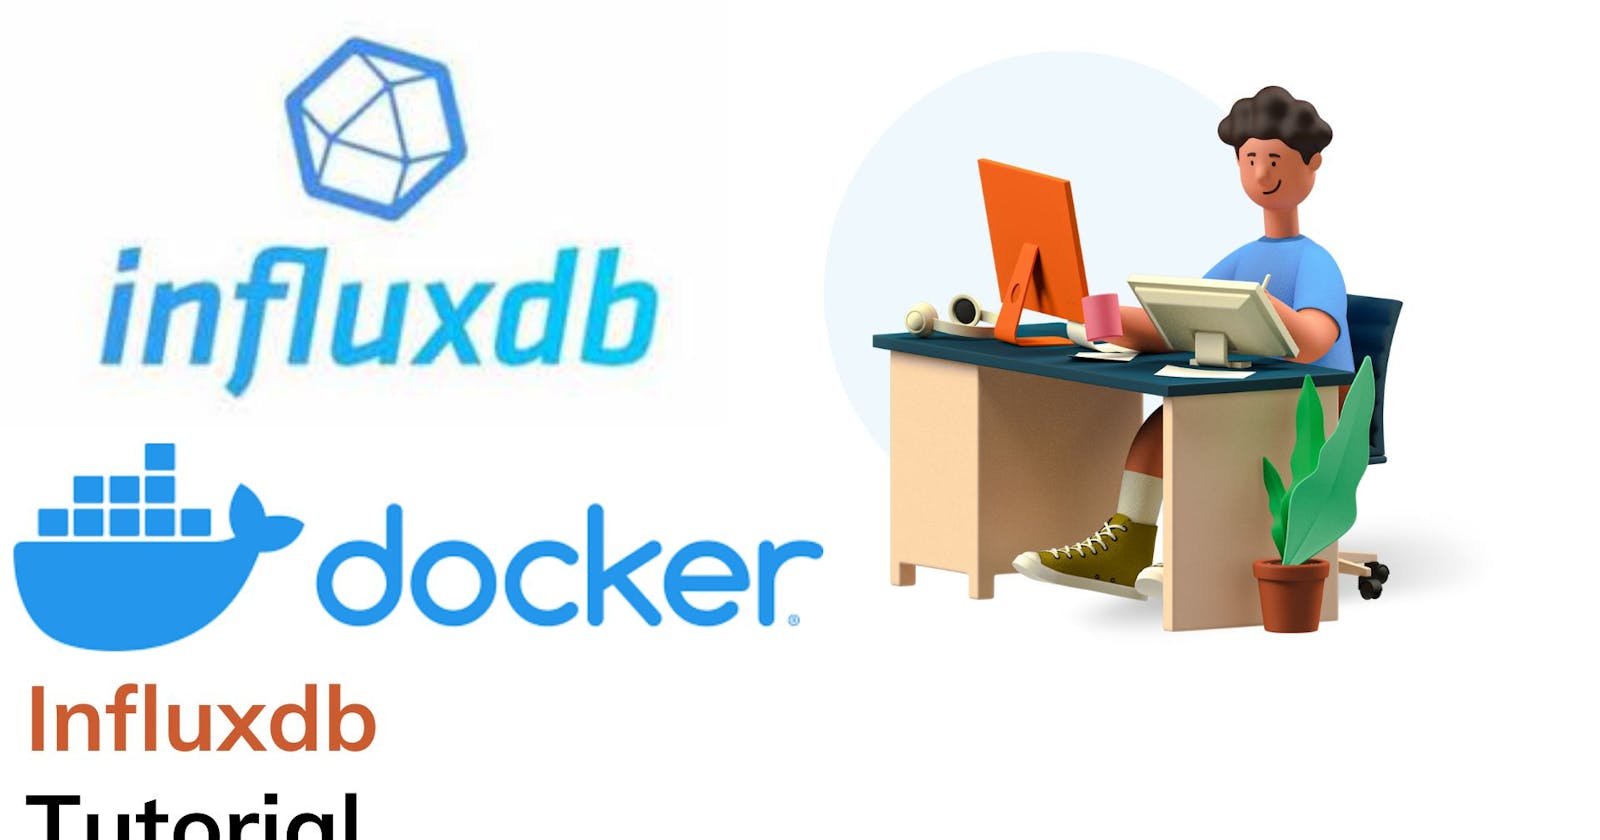 InfluxDatabase is up and running with Docker.